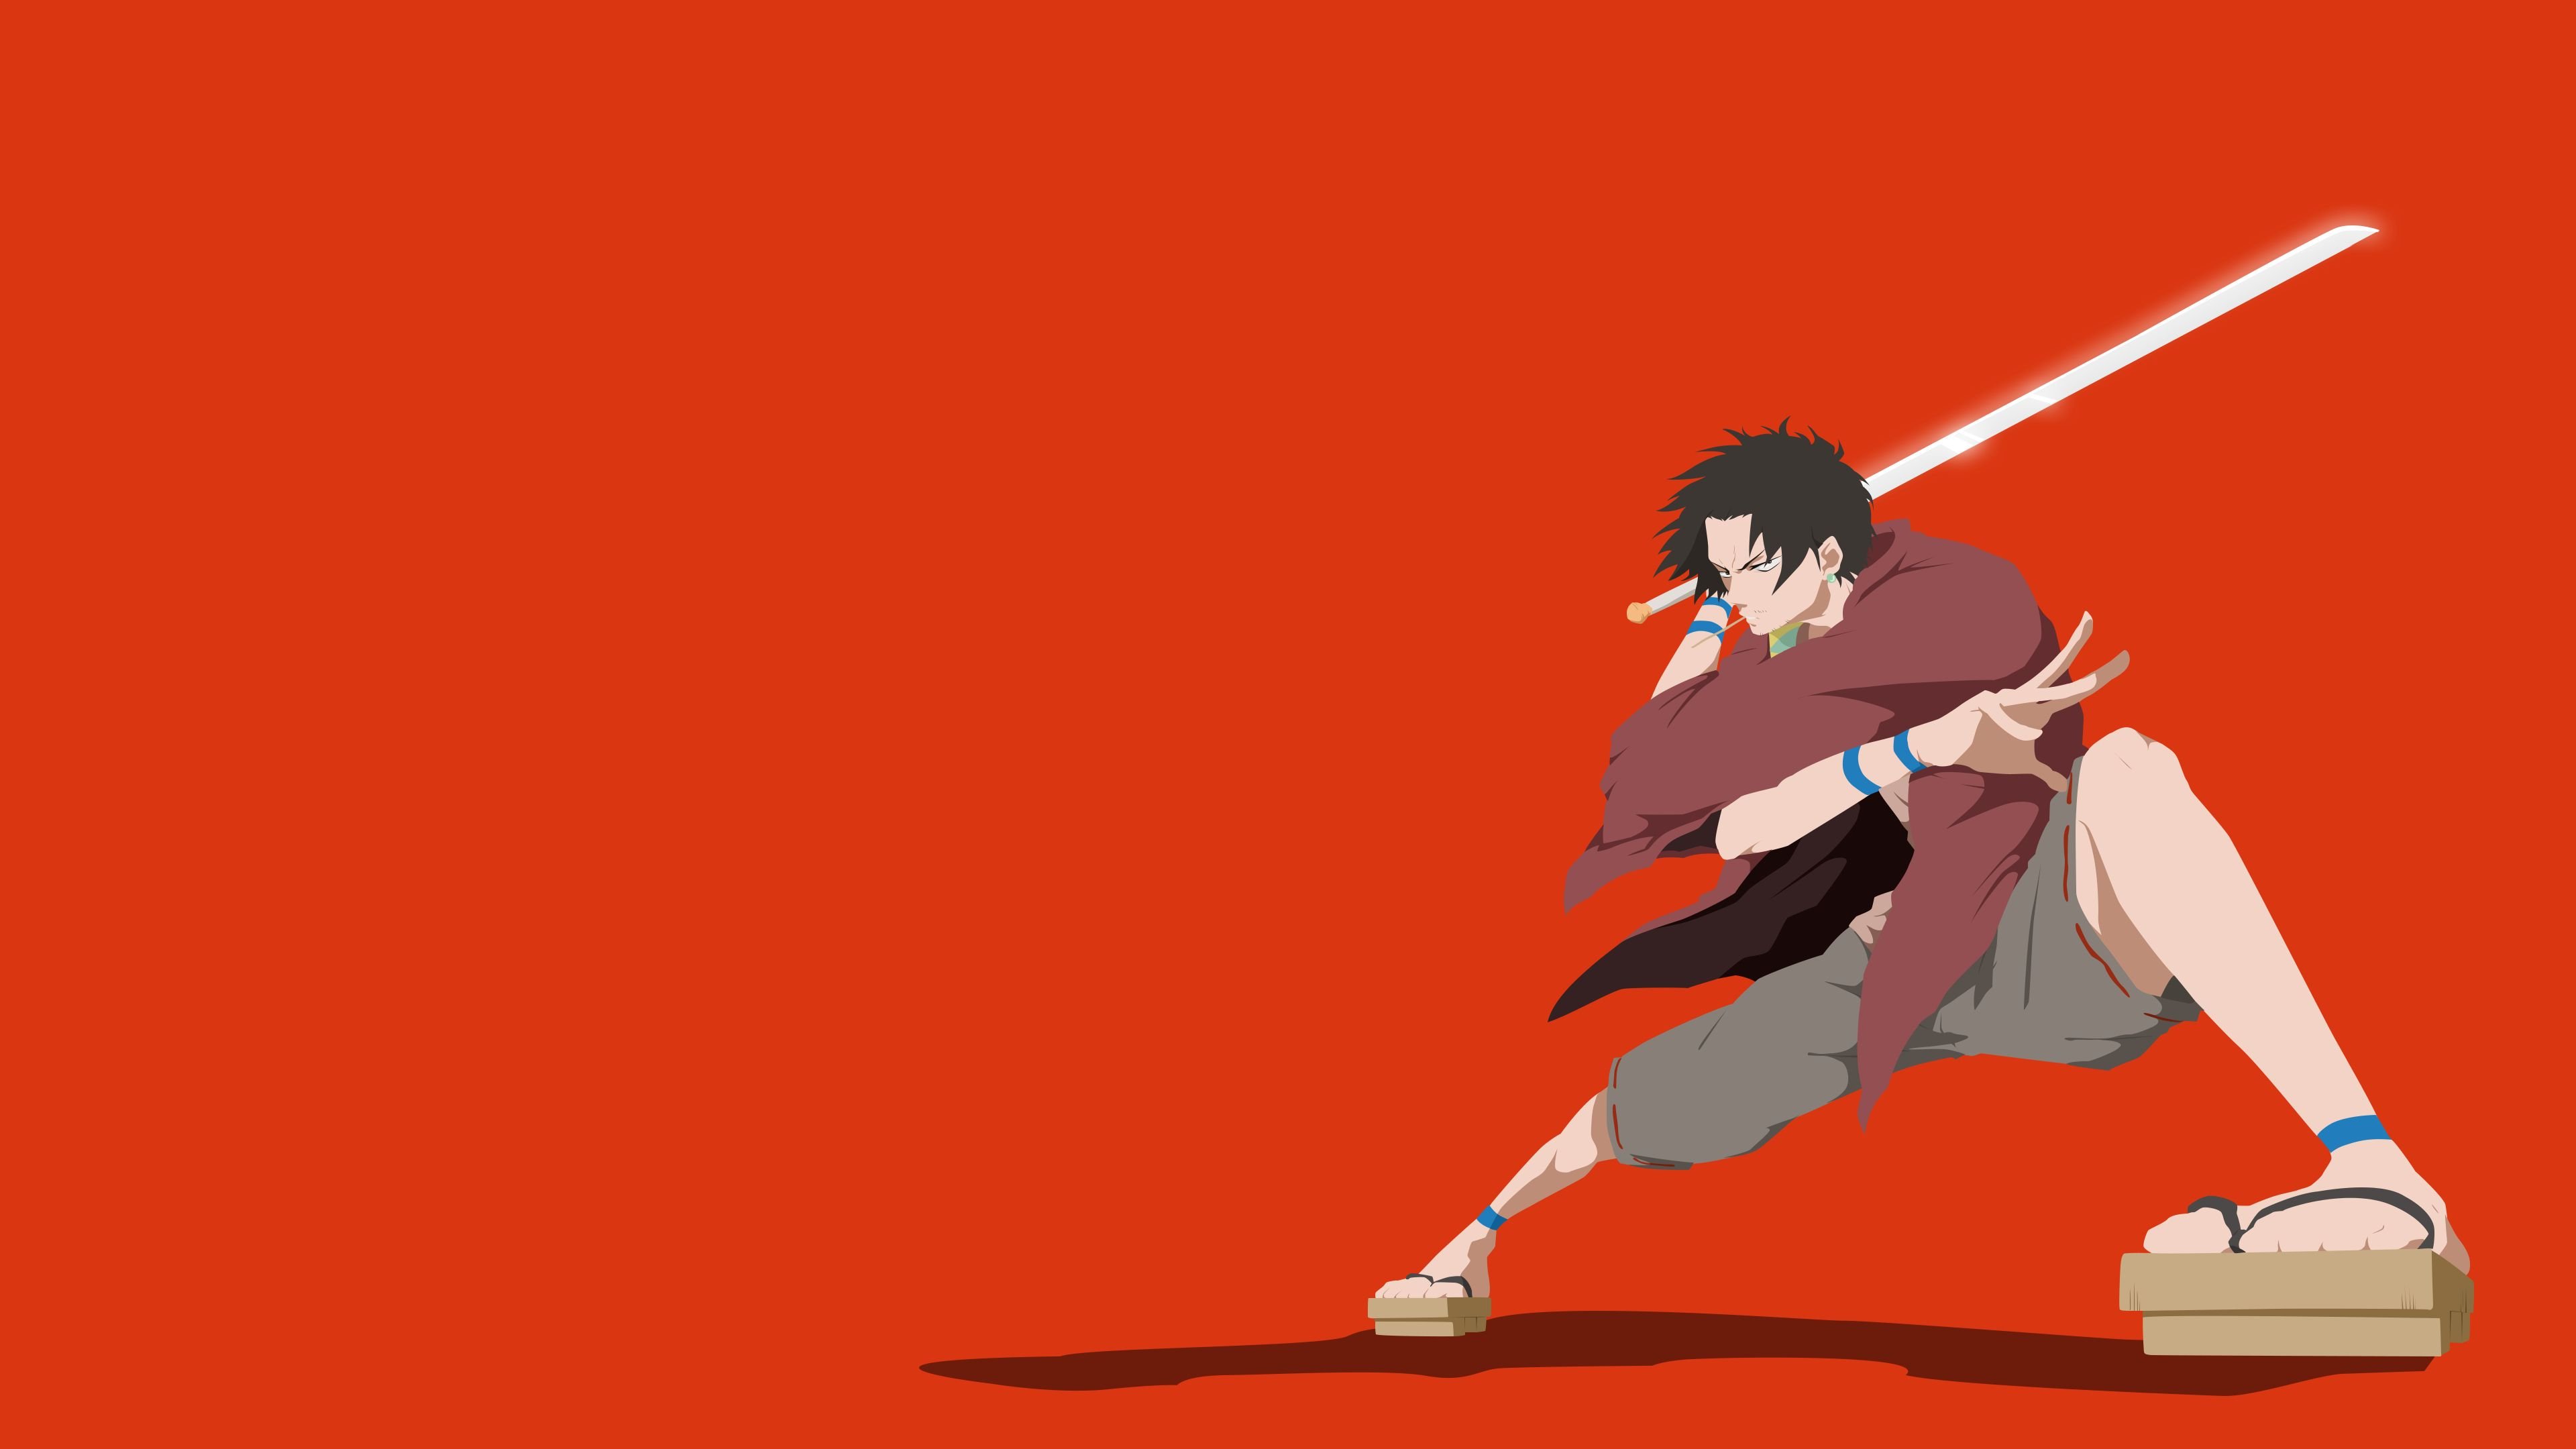 Anime Minimalist Wallpapers - Wallpaper Cave